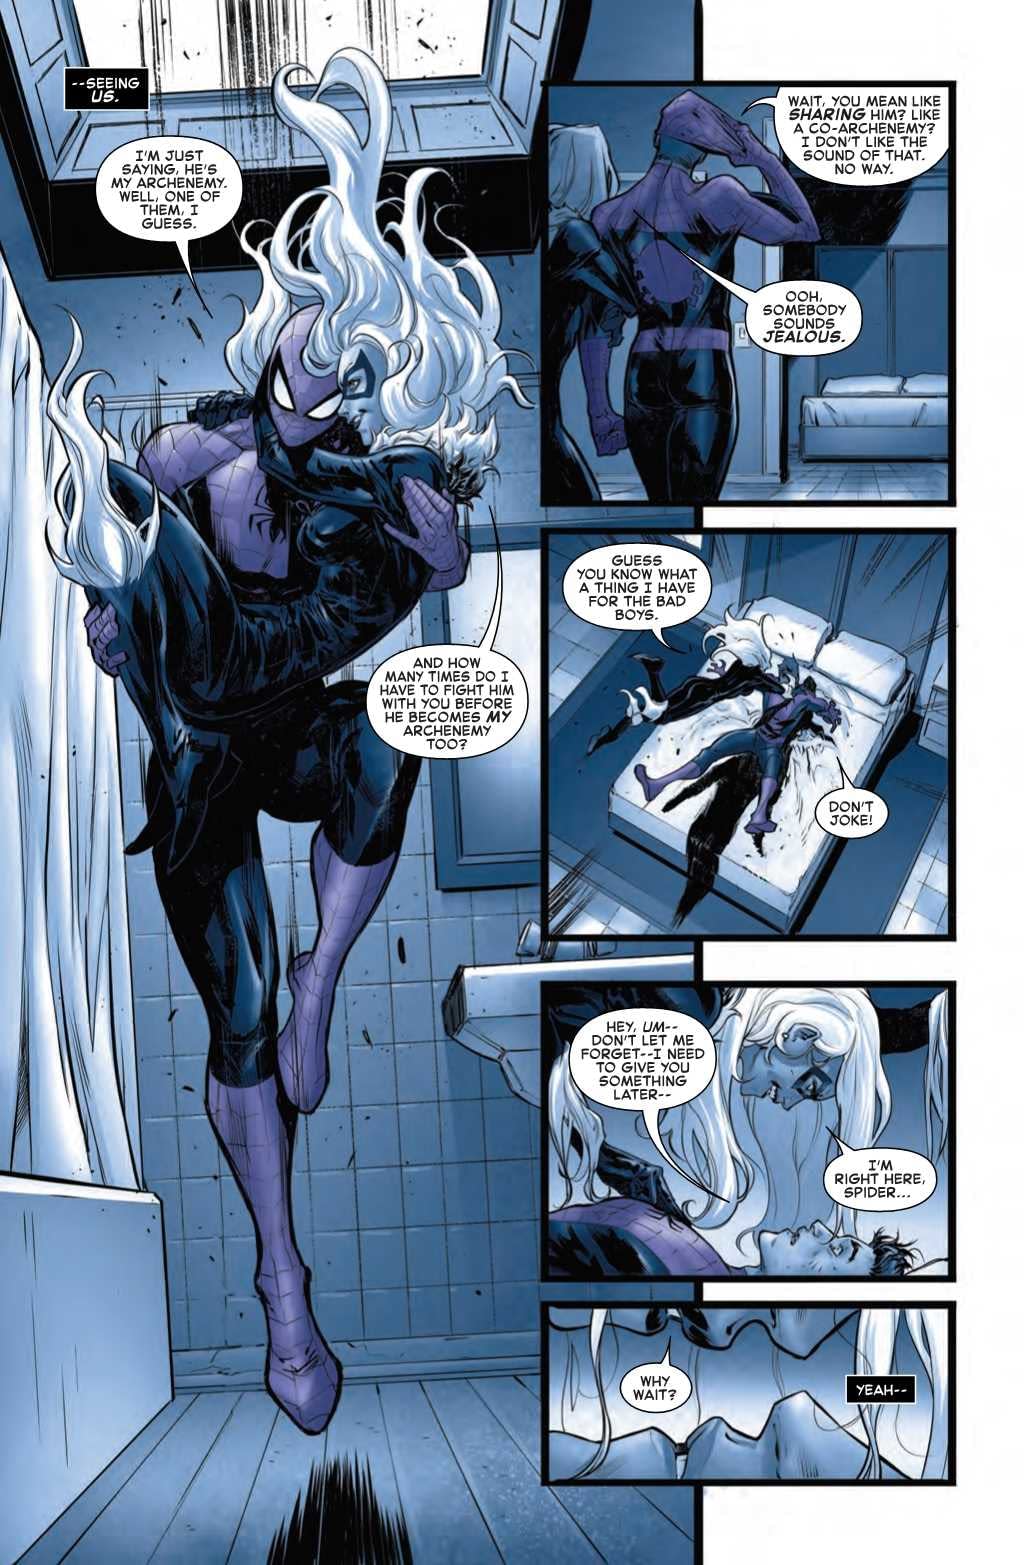 Spider Man And Black Cat Comics Porn - Black Cat Having Sex Dreams About Spider-Man in Next Week's Amazing Spider- Man #16.HU